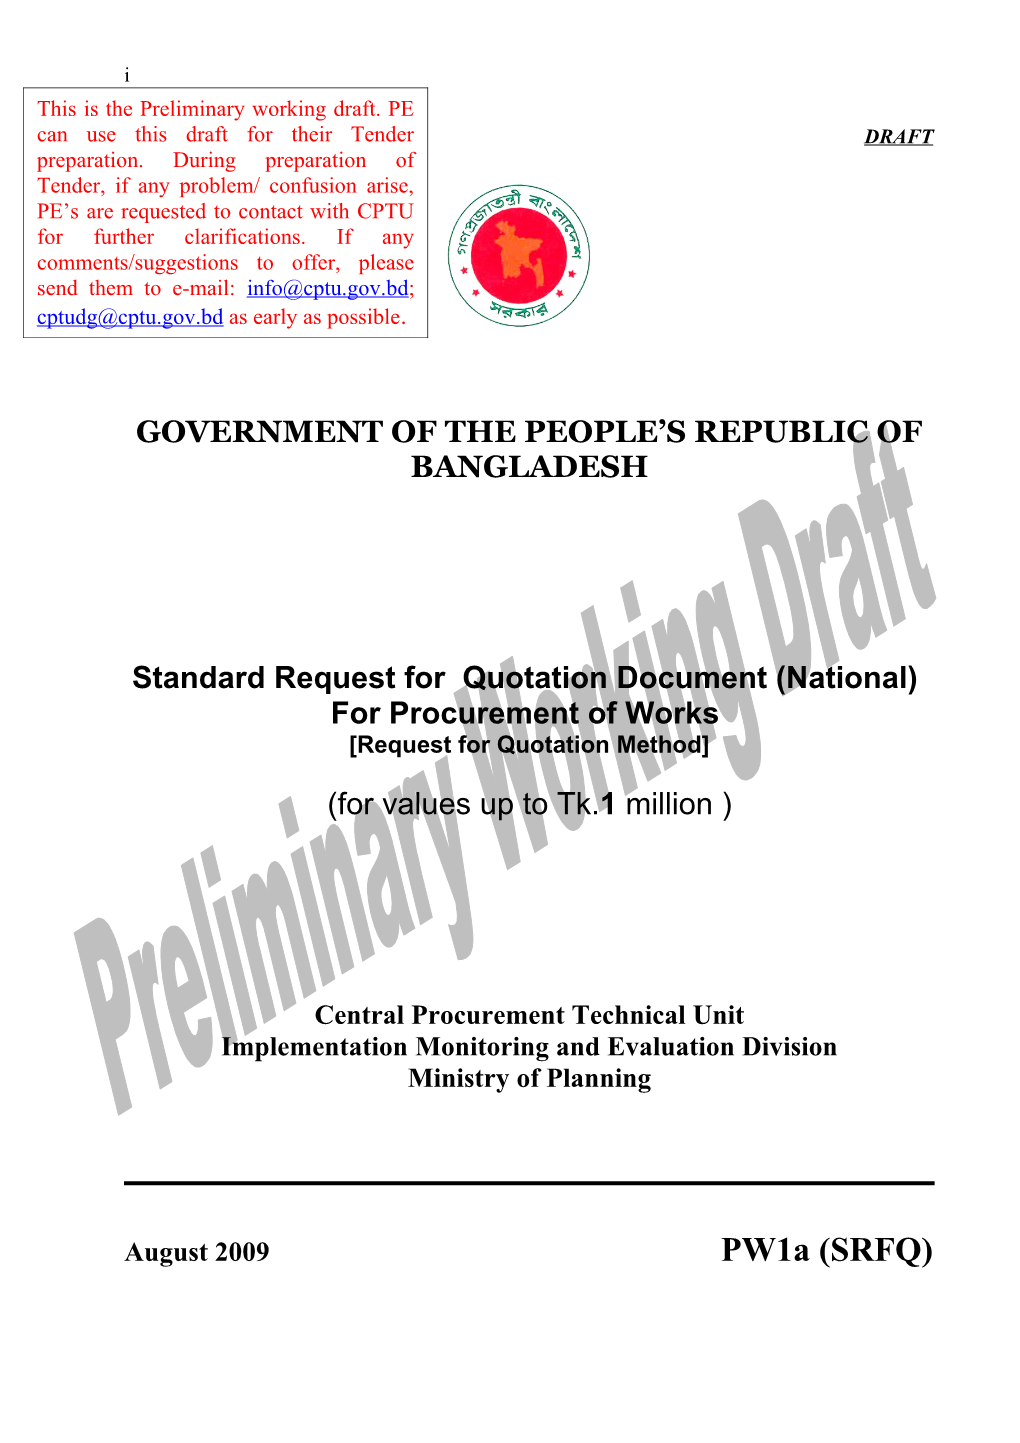 Standard Request for Quotation Document (National)